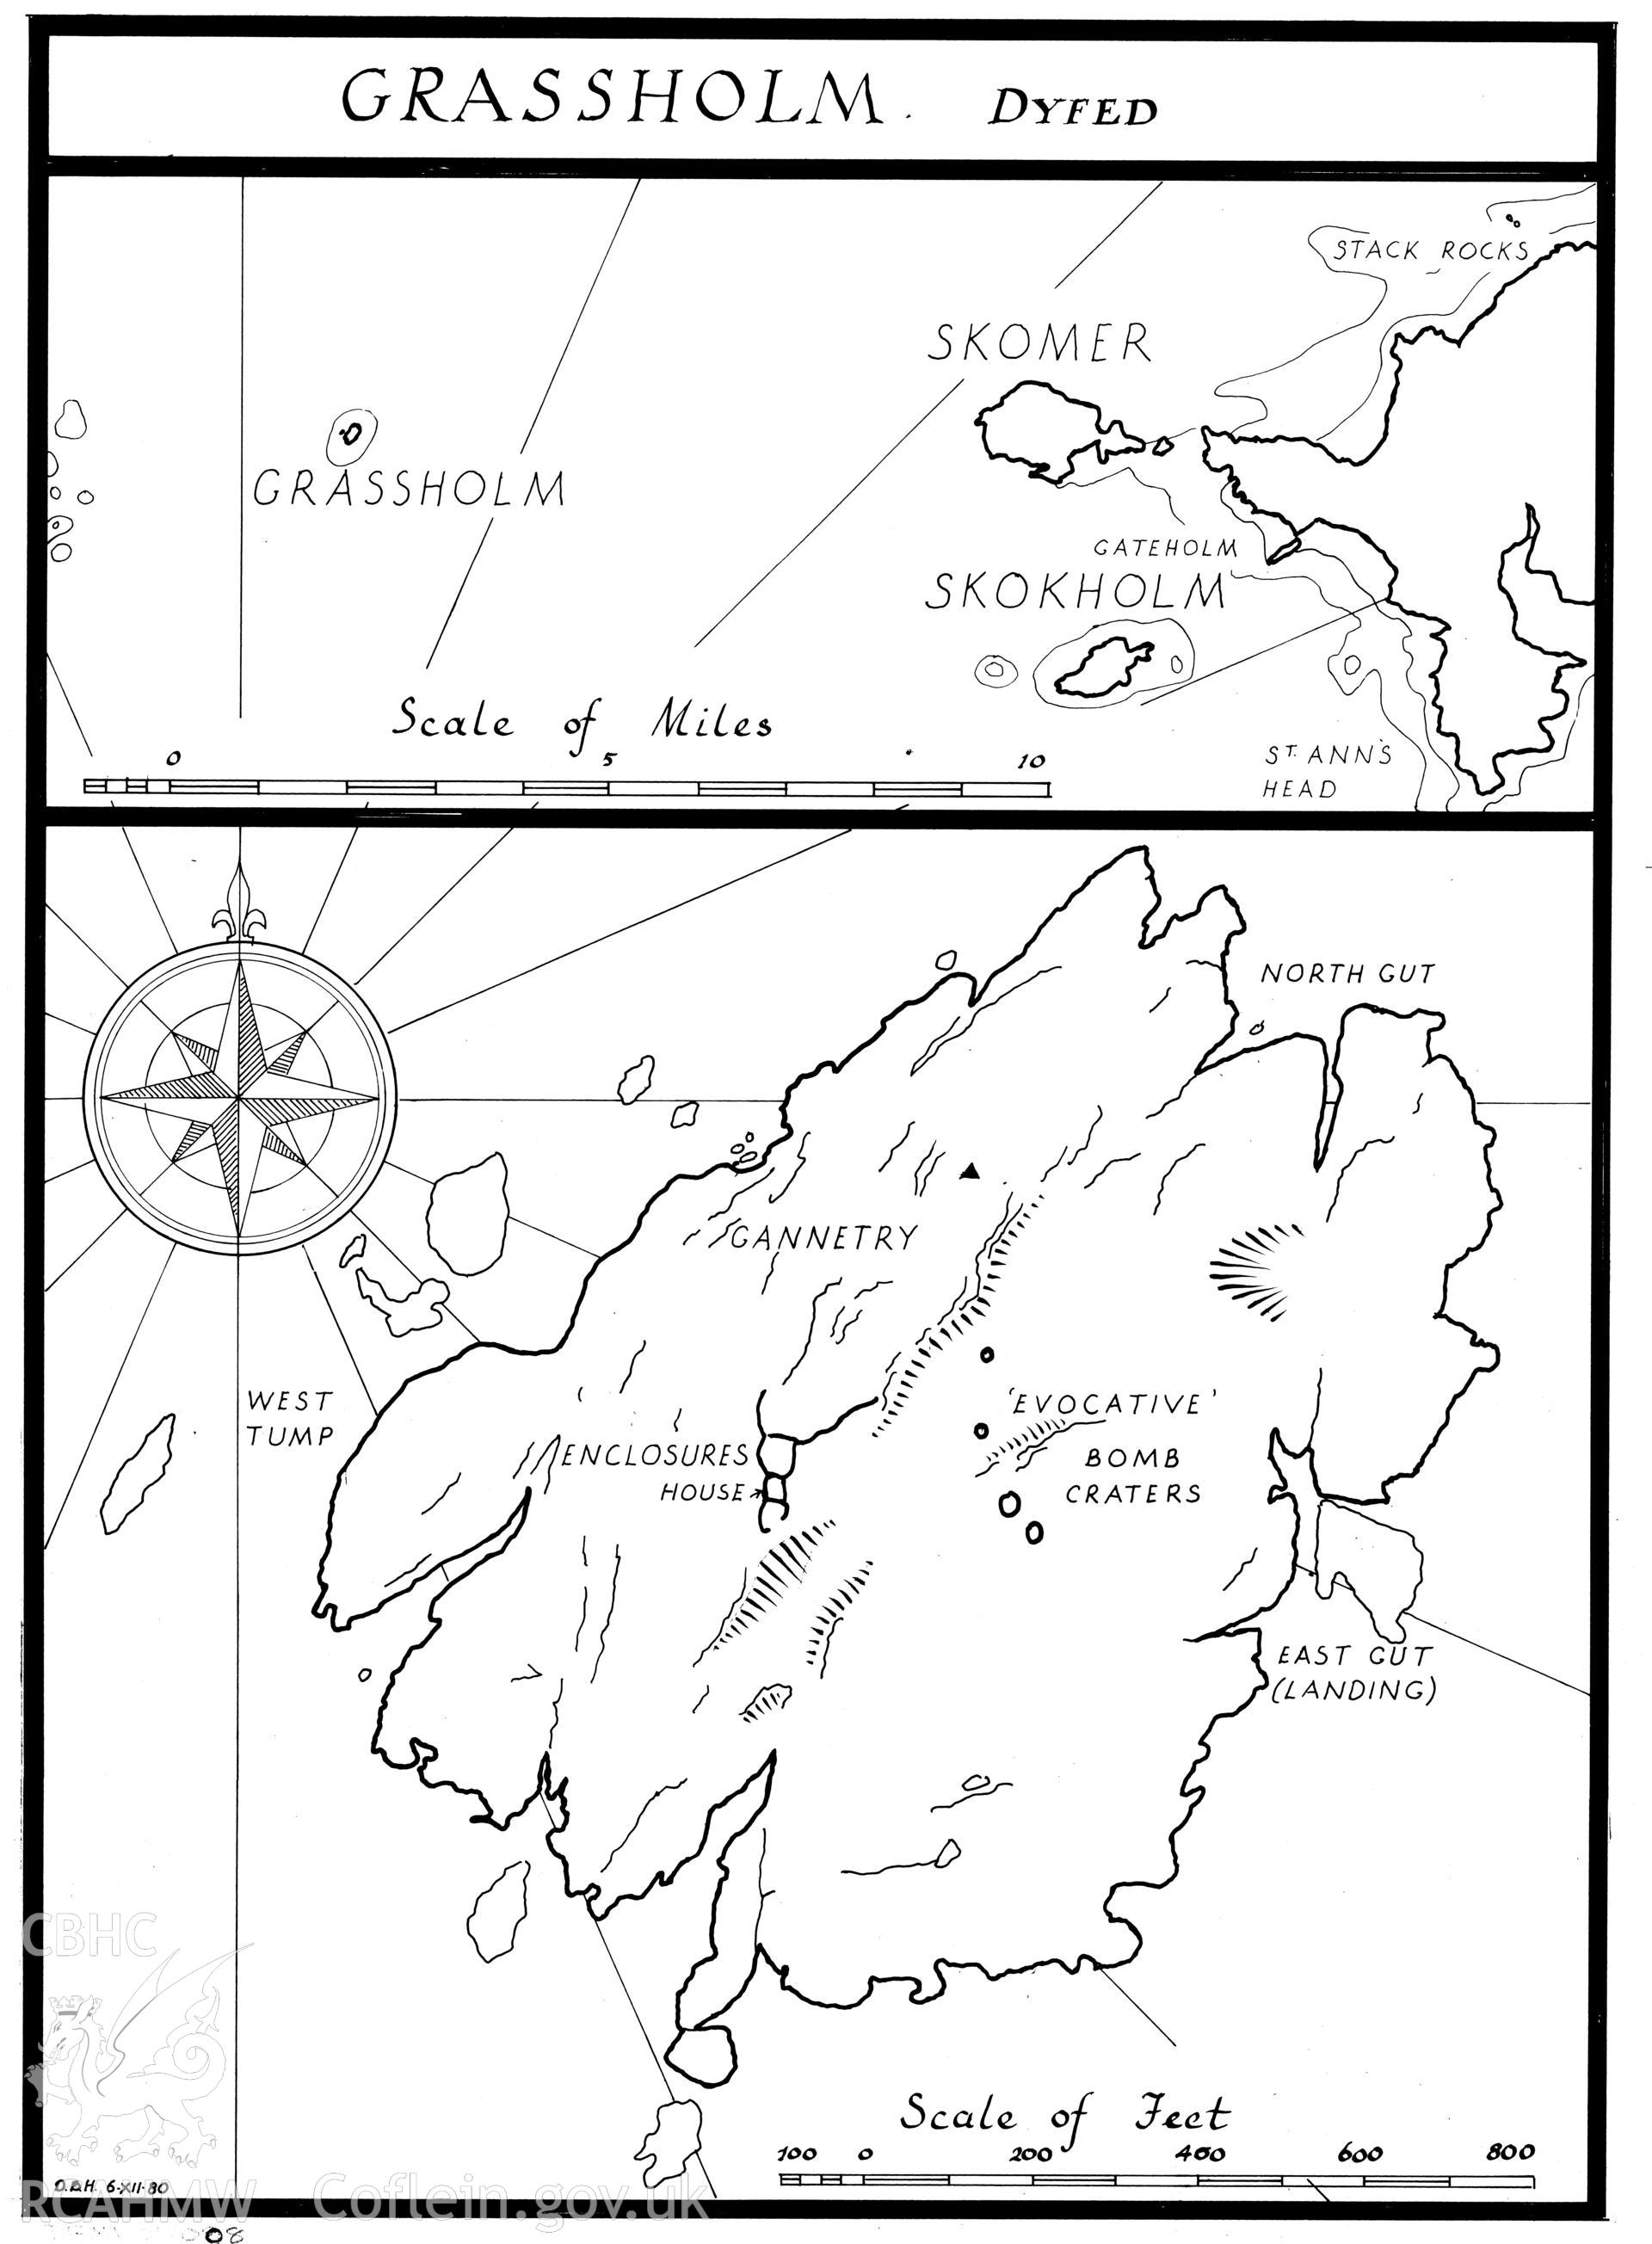 Dyeline copy of two maps of Grassholm Island, produced by Douglas Hague, December 1980.